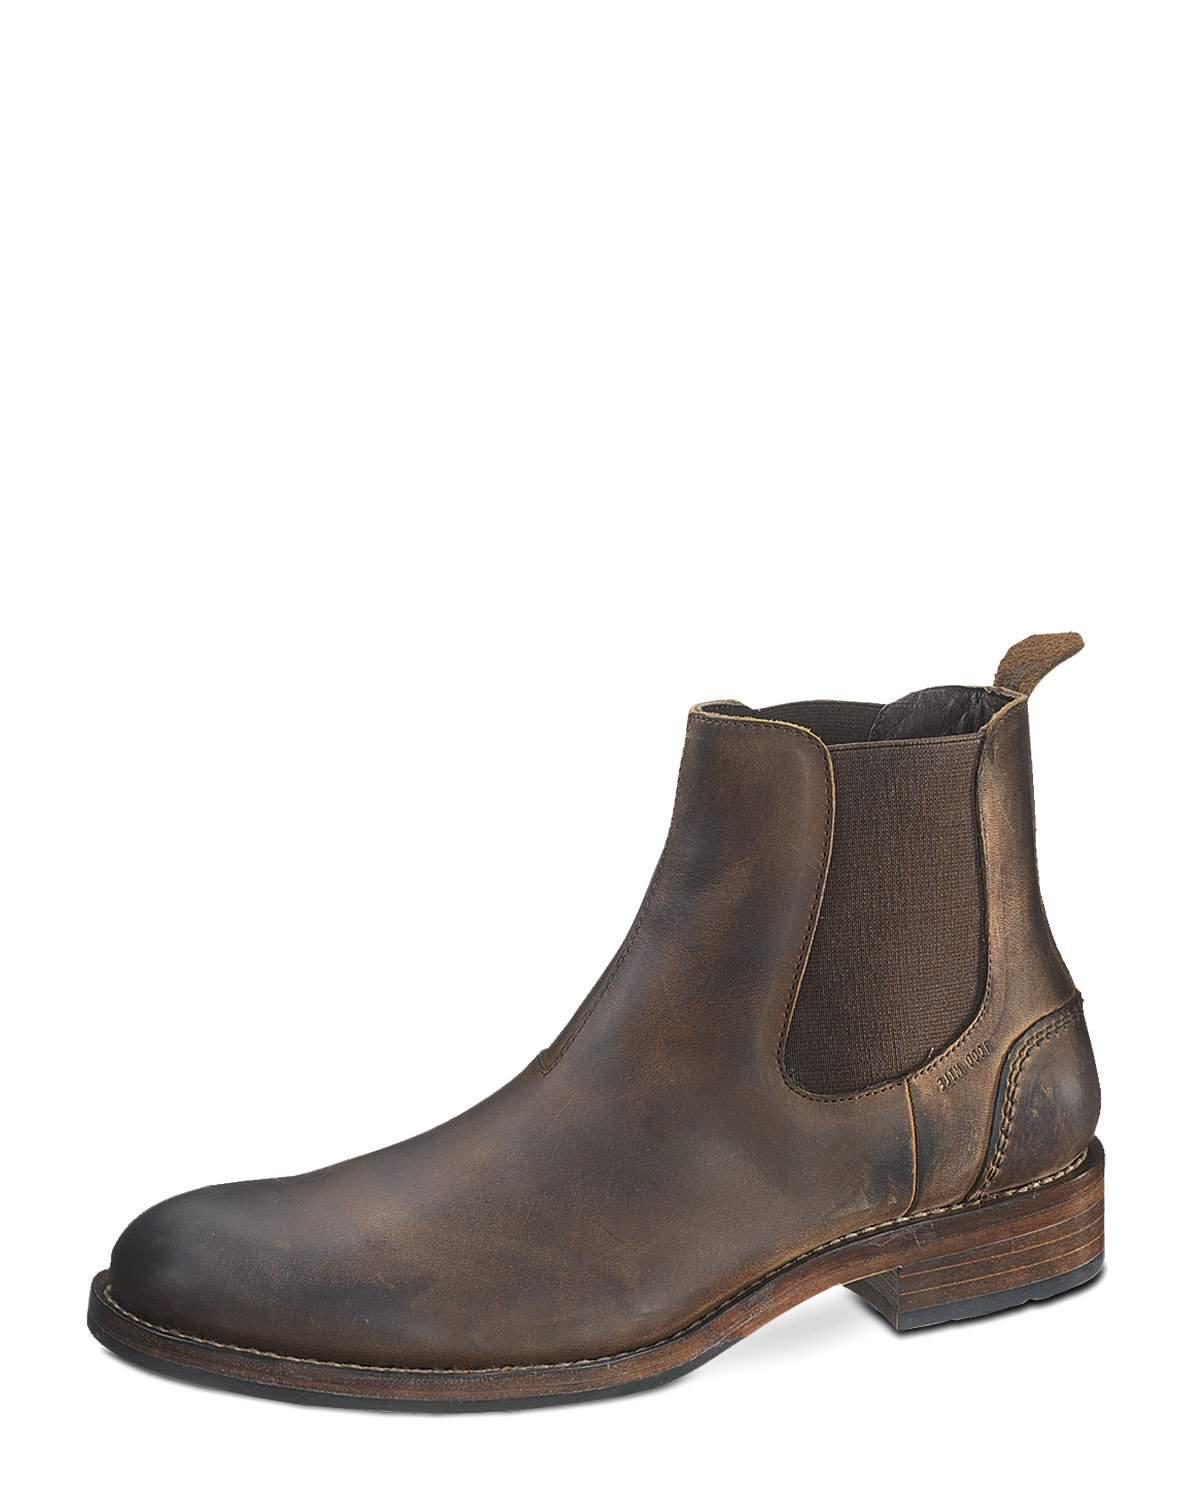 Lyst - Wolverine Montague 1000 Mile Chelsea Boot in Brown for Men